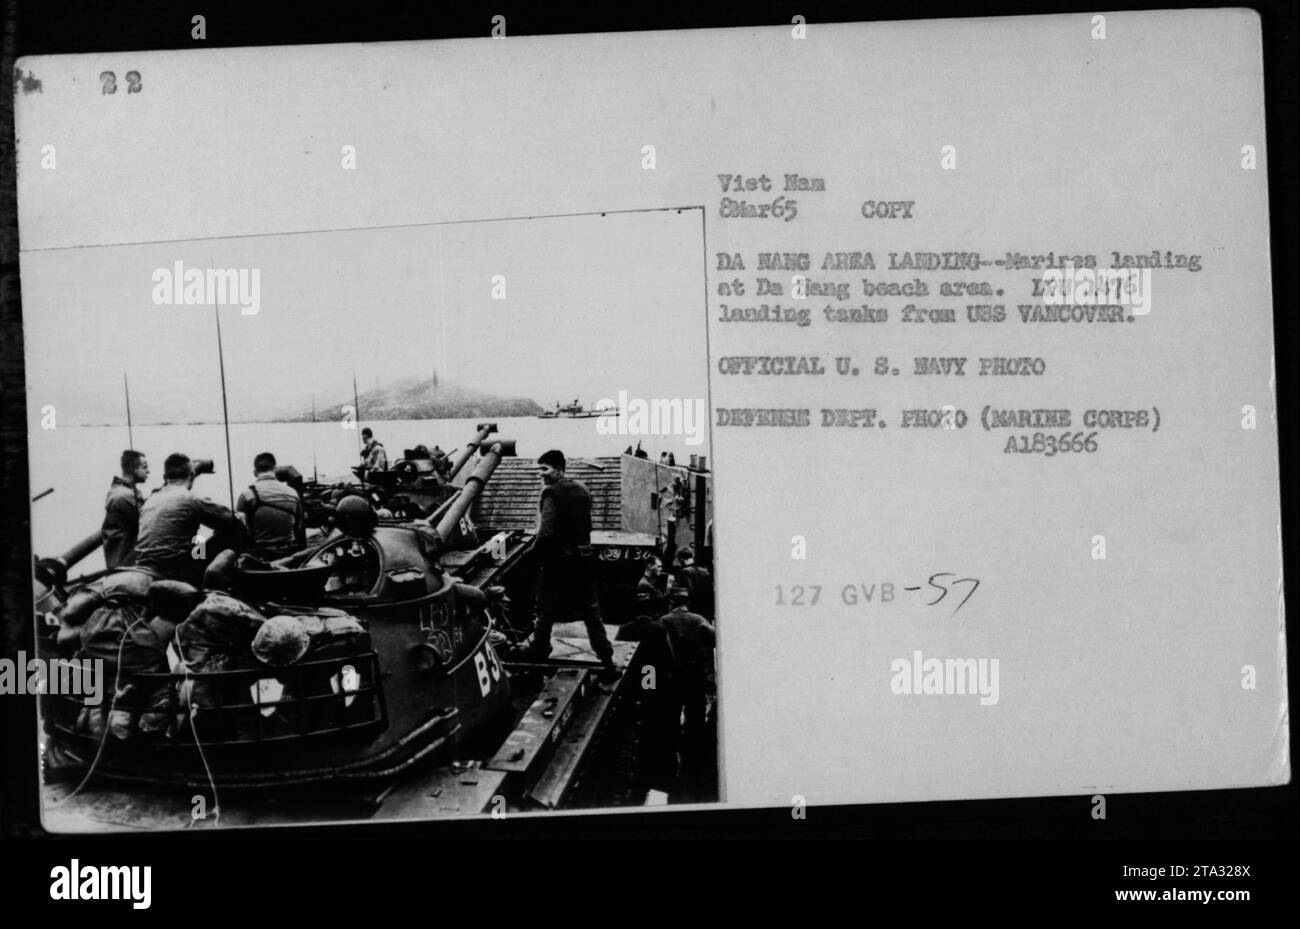 Marines landing at Da Nang beach area, with LPU 1476 landing tanks from USS Vancouver, during the Vietnam War on March 8, 1965. This official U.S. Navy photograph captures the military activities taking place in the area. Stock Photo